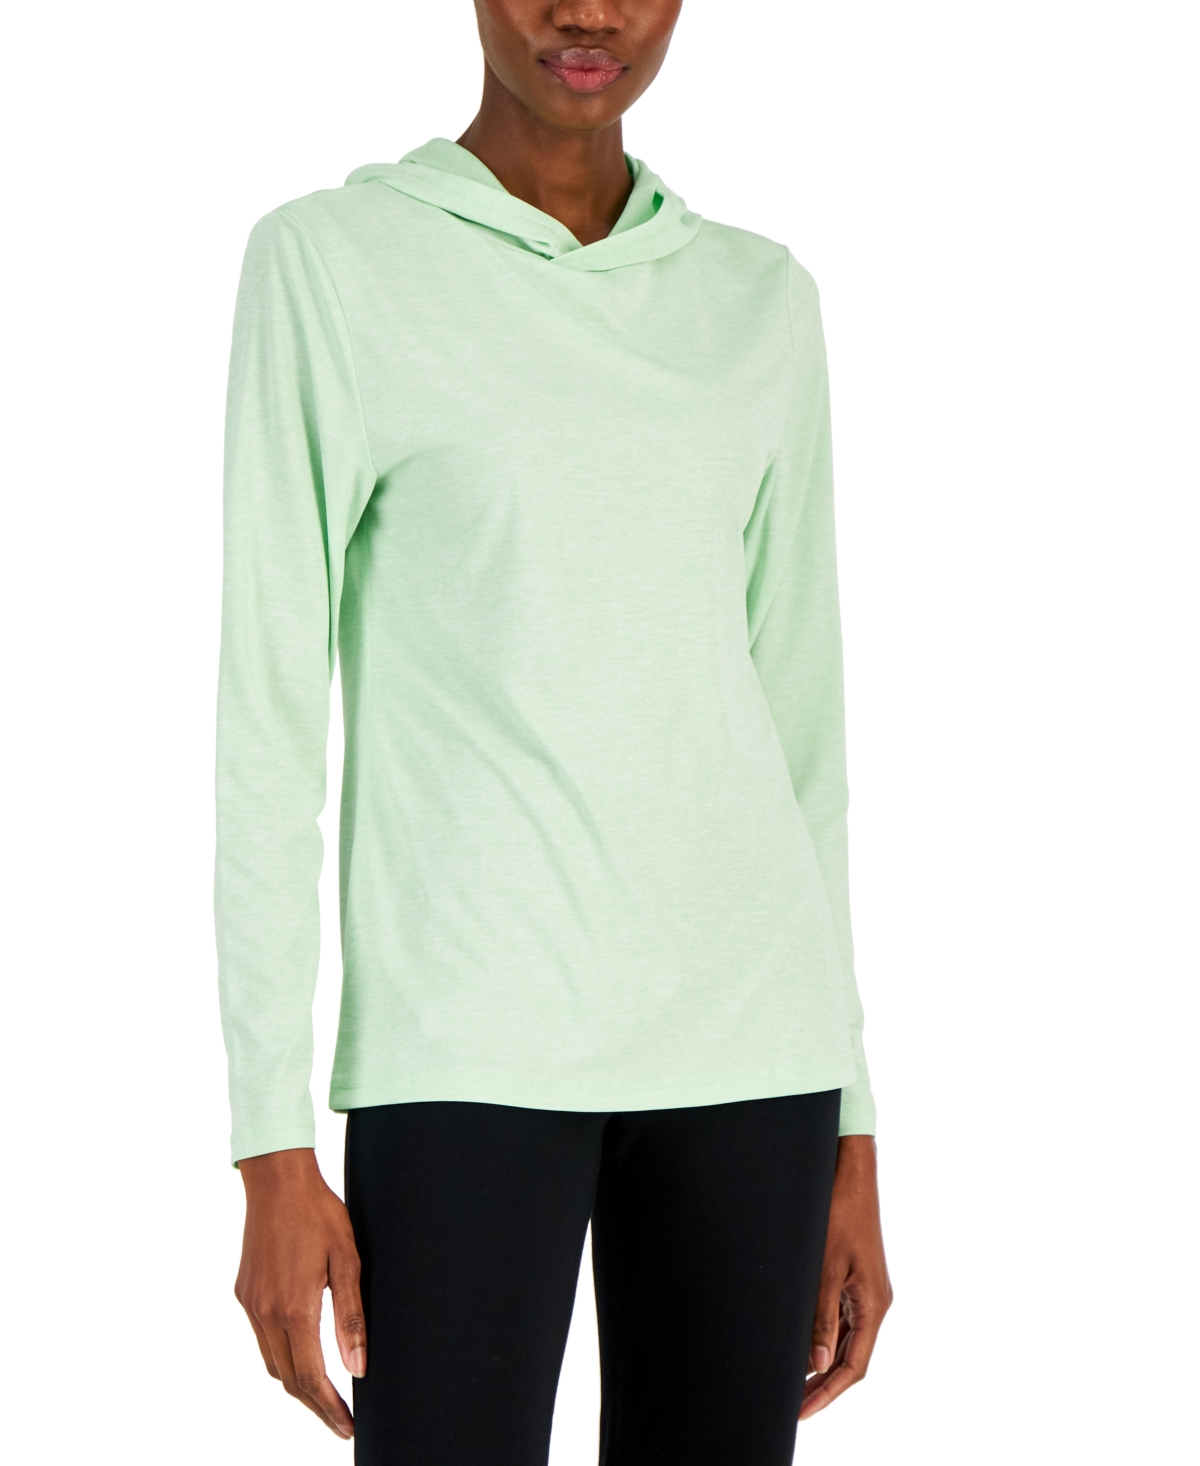 ID IDEOLOGY WOMEN'S ESSENTIALS LIGHT WEIGHT HOODED LONG SLEEVE, CREATED FOR MACY'S